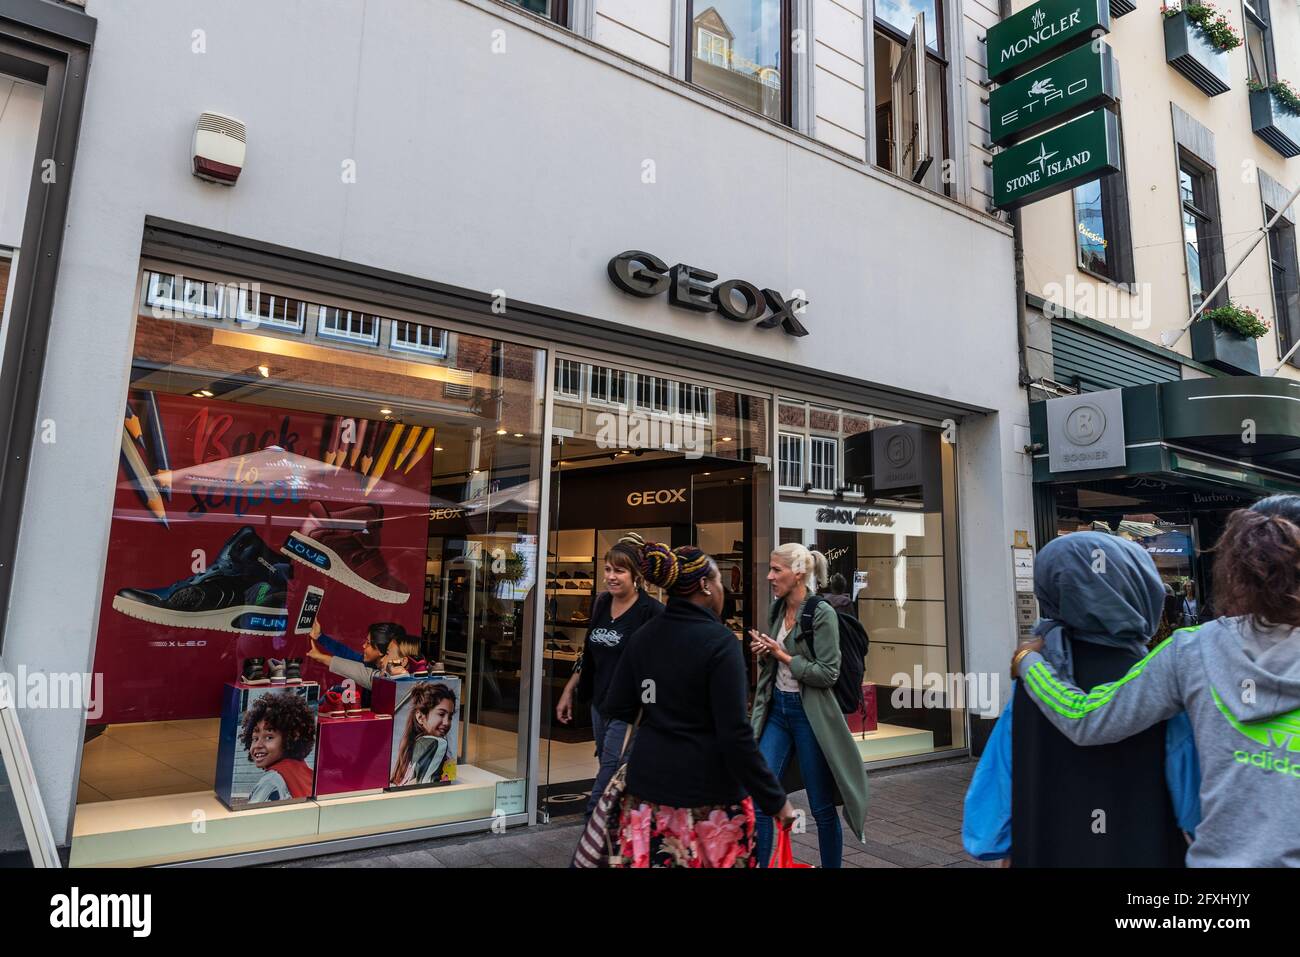 Dictatuur maagpijn recept Bremen, Germany - August 19, 2019: Facade of a Geox shoe store with people  around in a shopping street of Bremen, Germany Stock Photo - Alamy